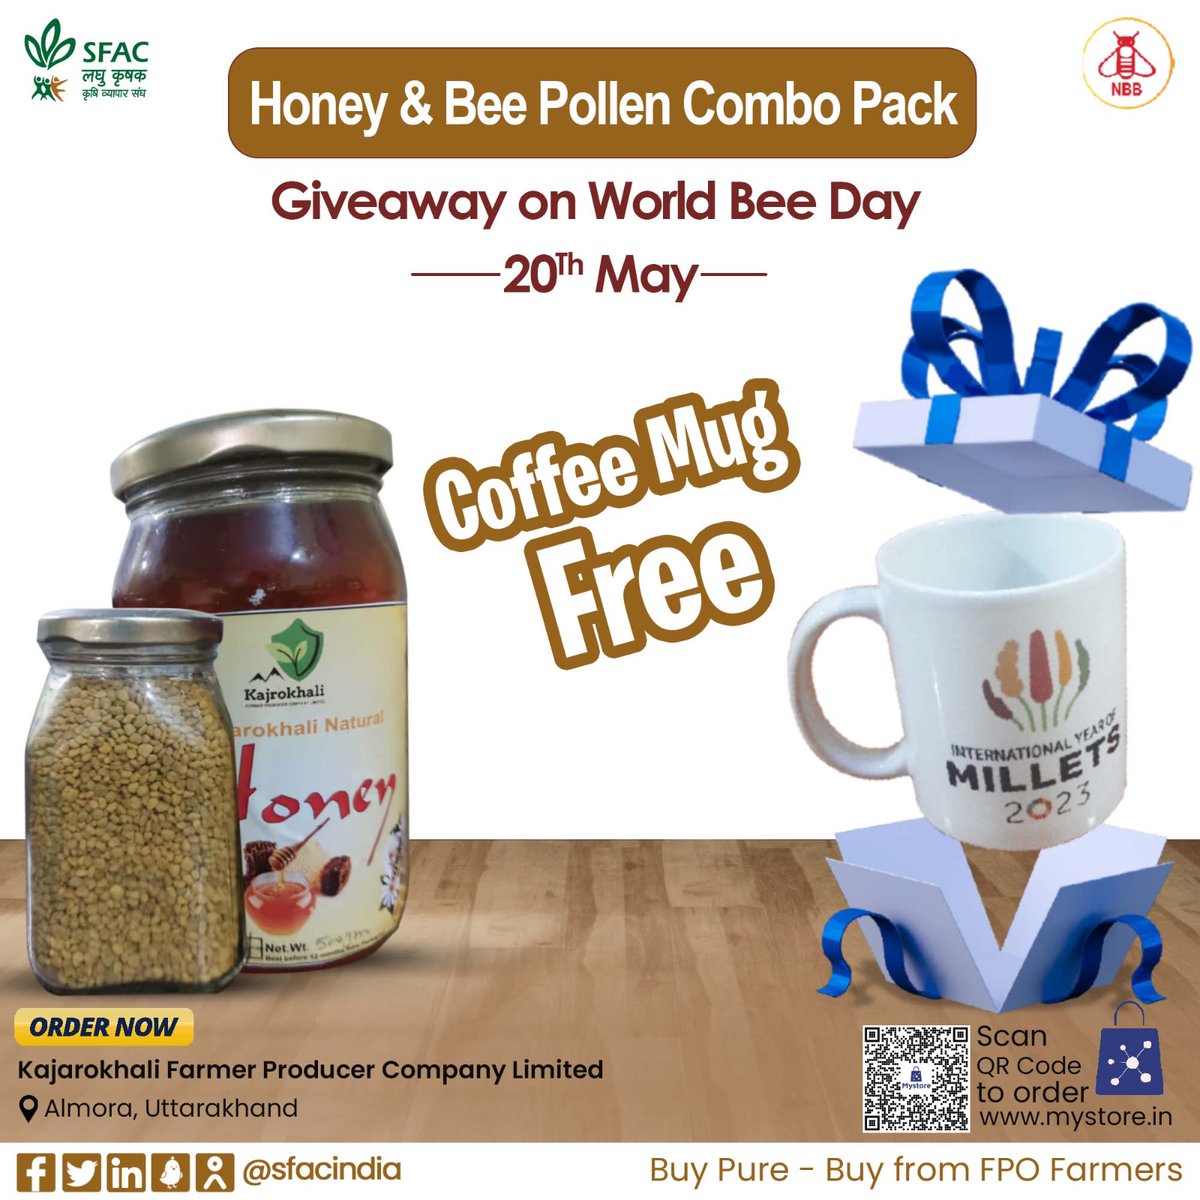 Giveaway on World Bee Day
20th May

Enjoy eternal goodness of pure natural honey with bee pollen & WIN a coffee mug FREE.
Valid for first 5 orders
Buy straight from FPO farmers👇

mystore.in/en/product/hon…

🍯

#VocalForLocal #healthychoices #healthyeating #healthyhabits #NBB